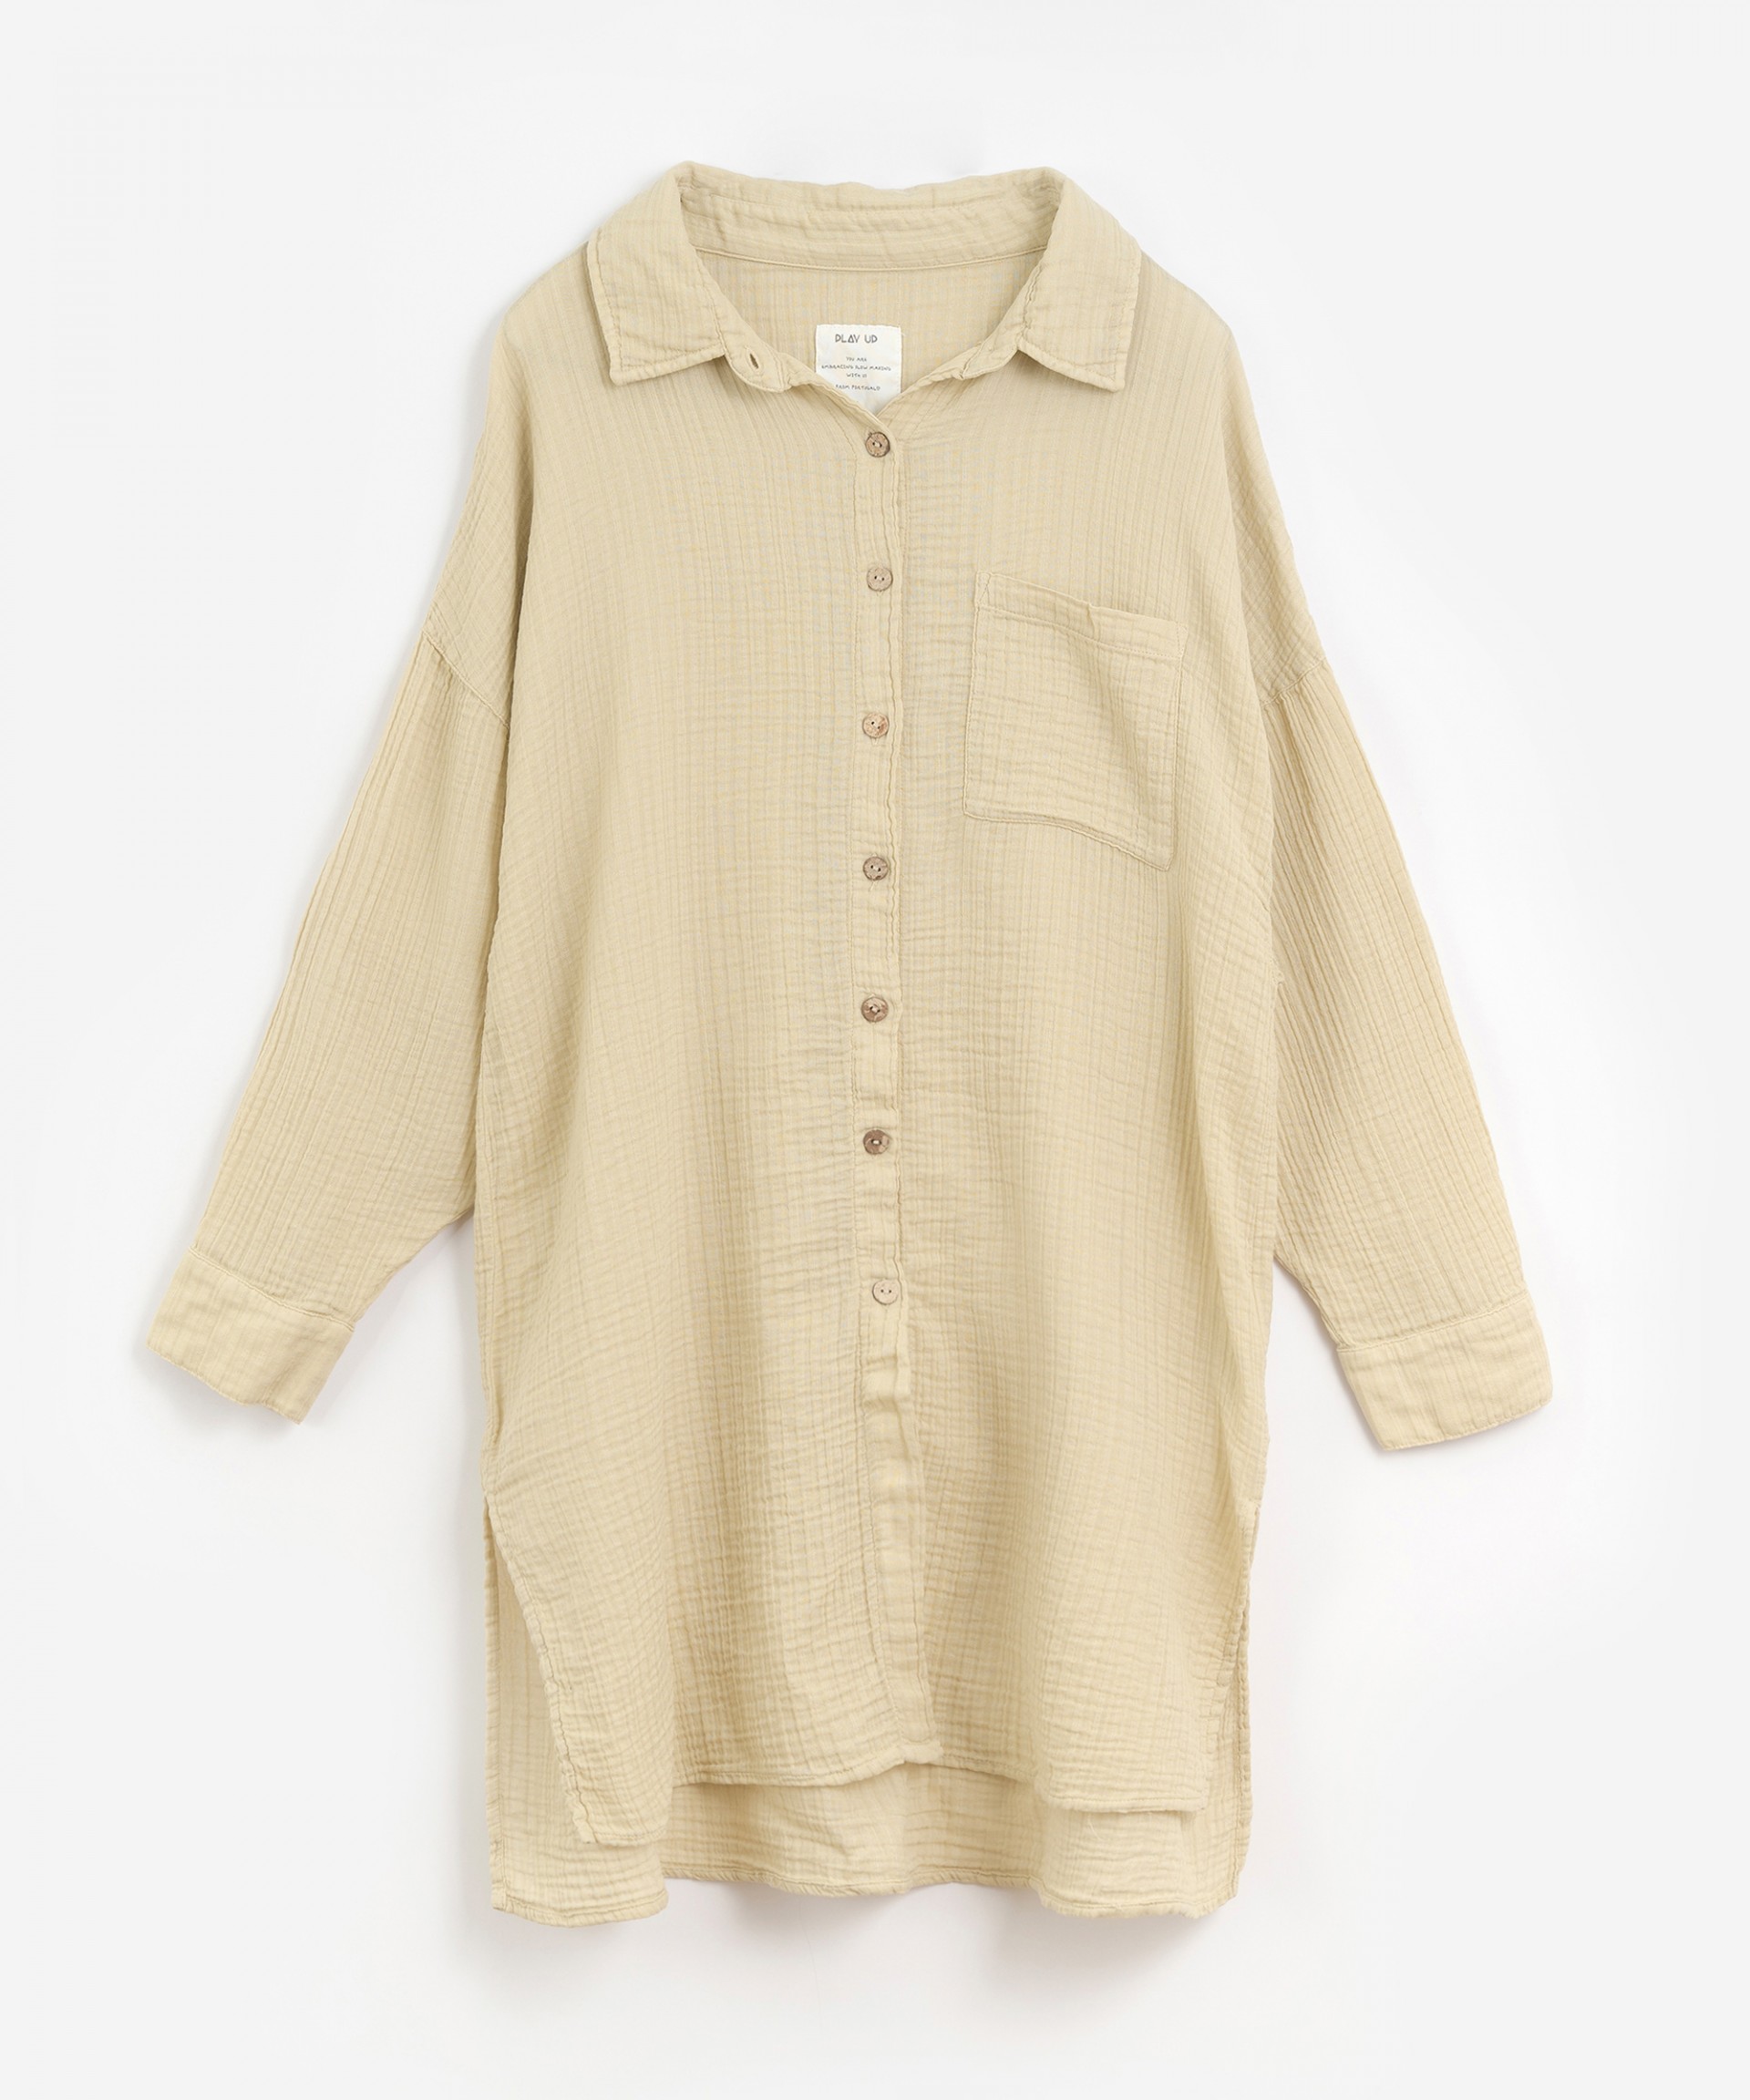 Woven shirt with breast pocket | Organic Care